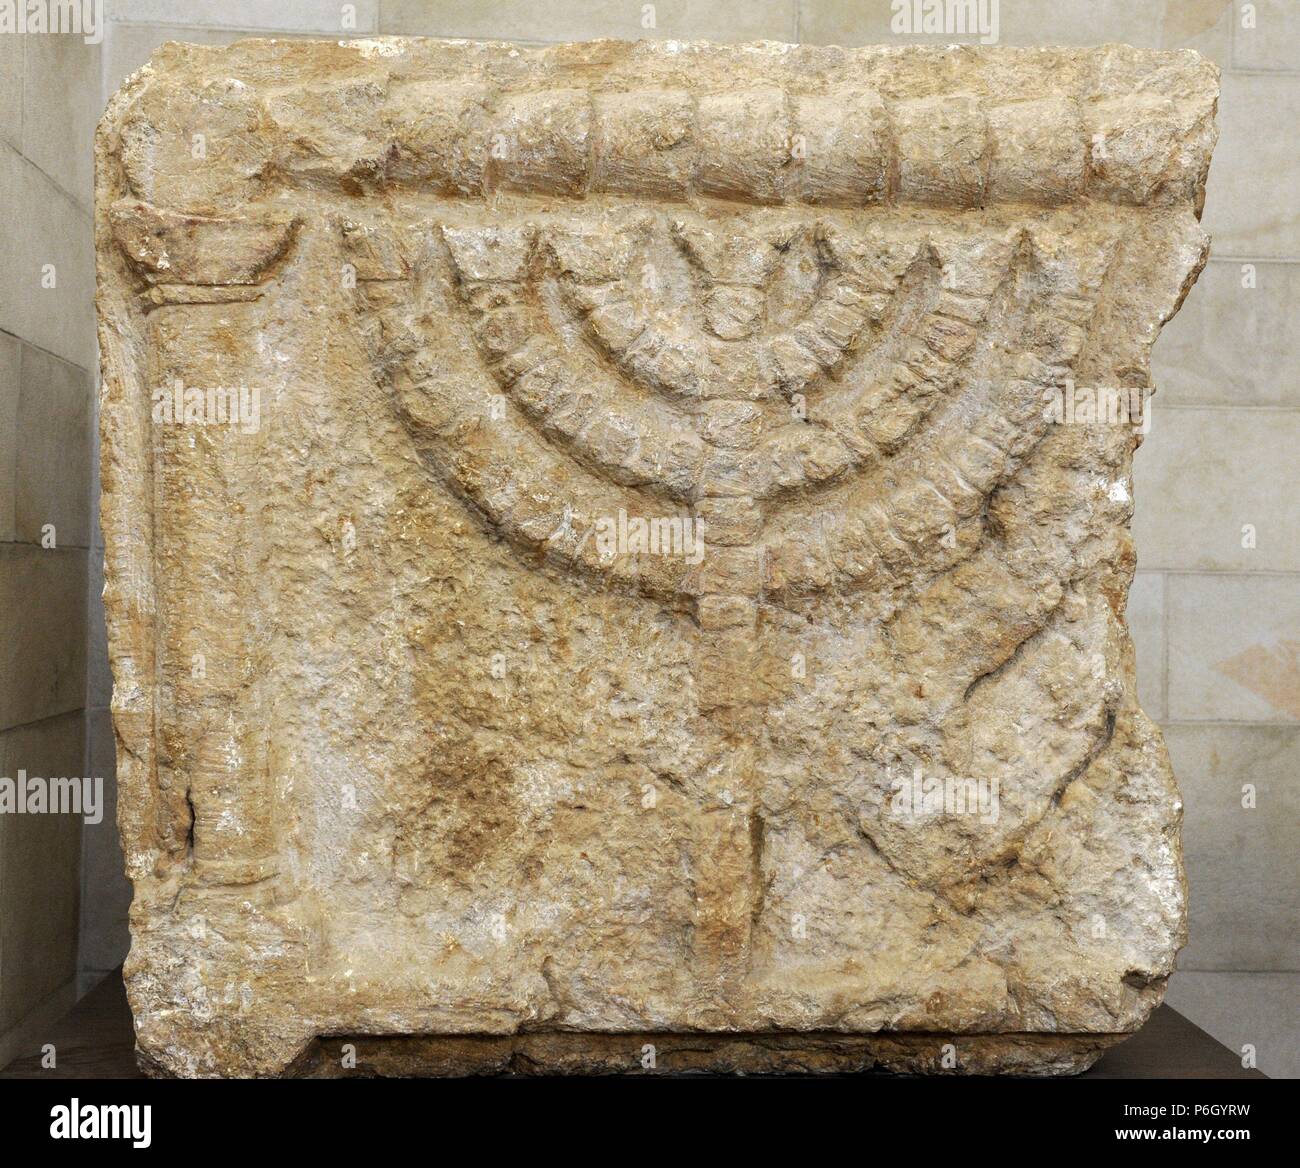 Stone lintels decorated with the Seven-Branched Menorah synagogue at Eshtemoa. Southern Hebron hill region. 3rd-4th century CE. Rockefeller Archaeological Museum. Jerusalem. Israel. Stock Photo